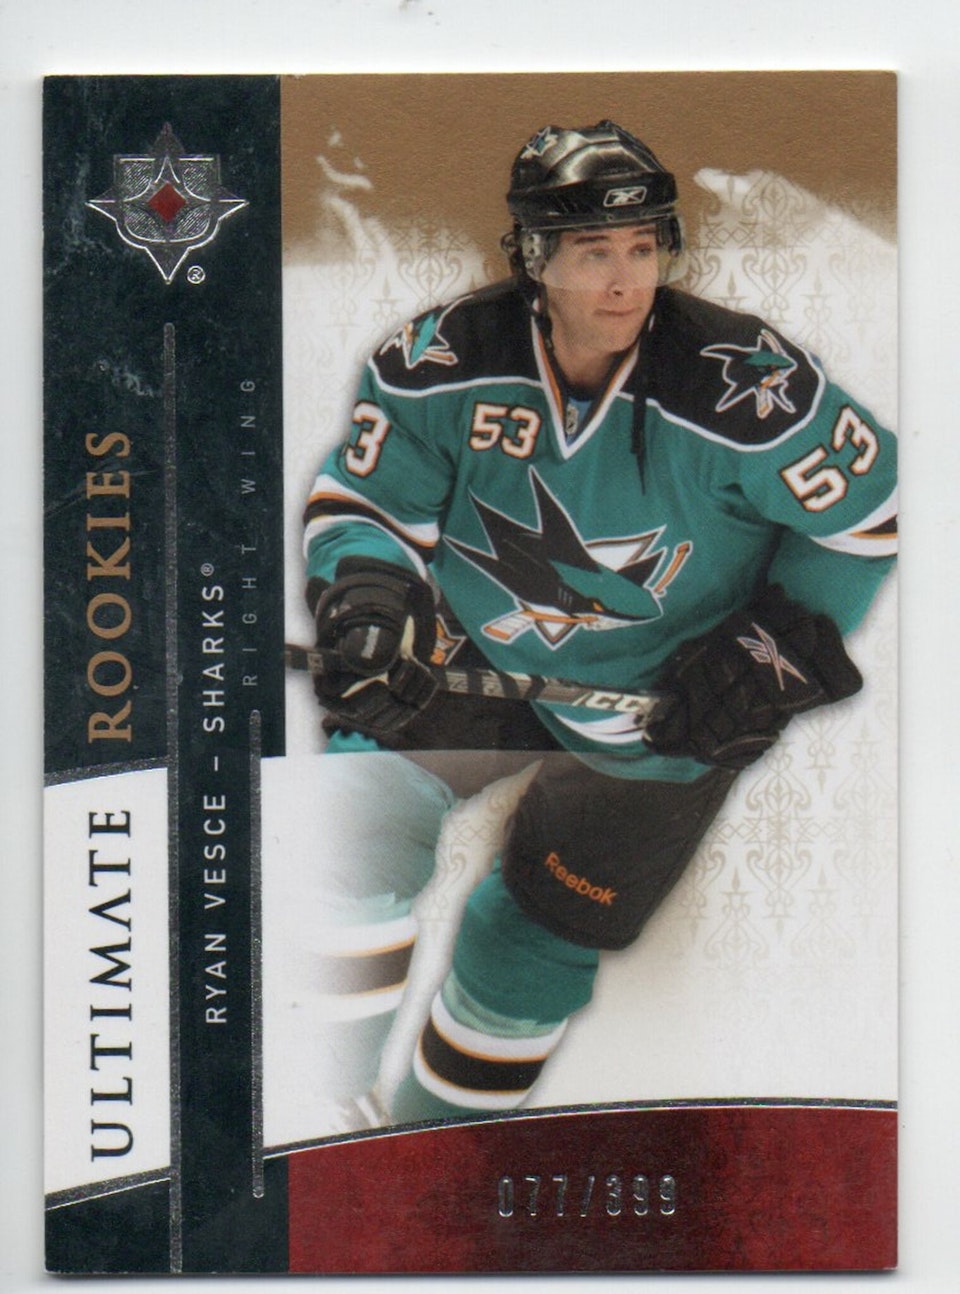 2009-10 Ultimate Collection #153 Ryan Vesce RC (25-213x3-SHARKS)